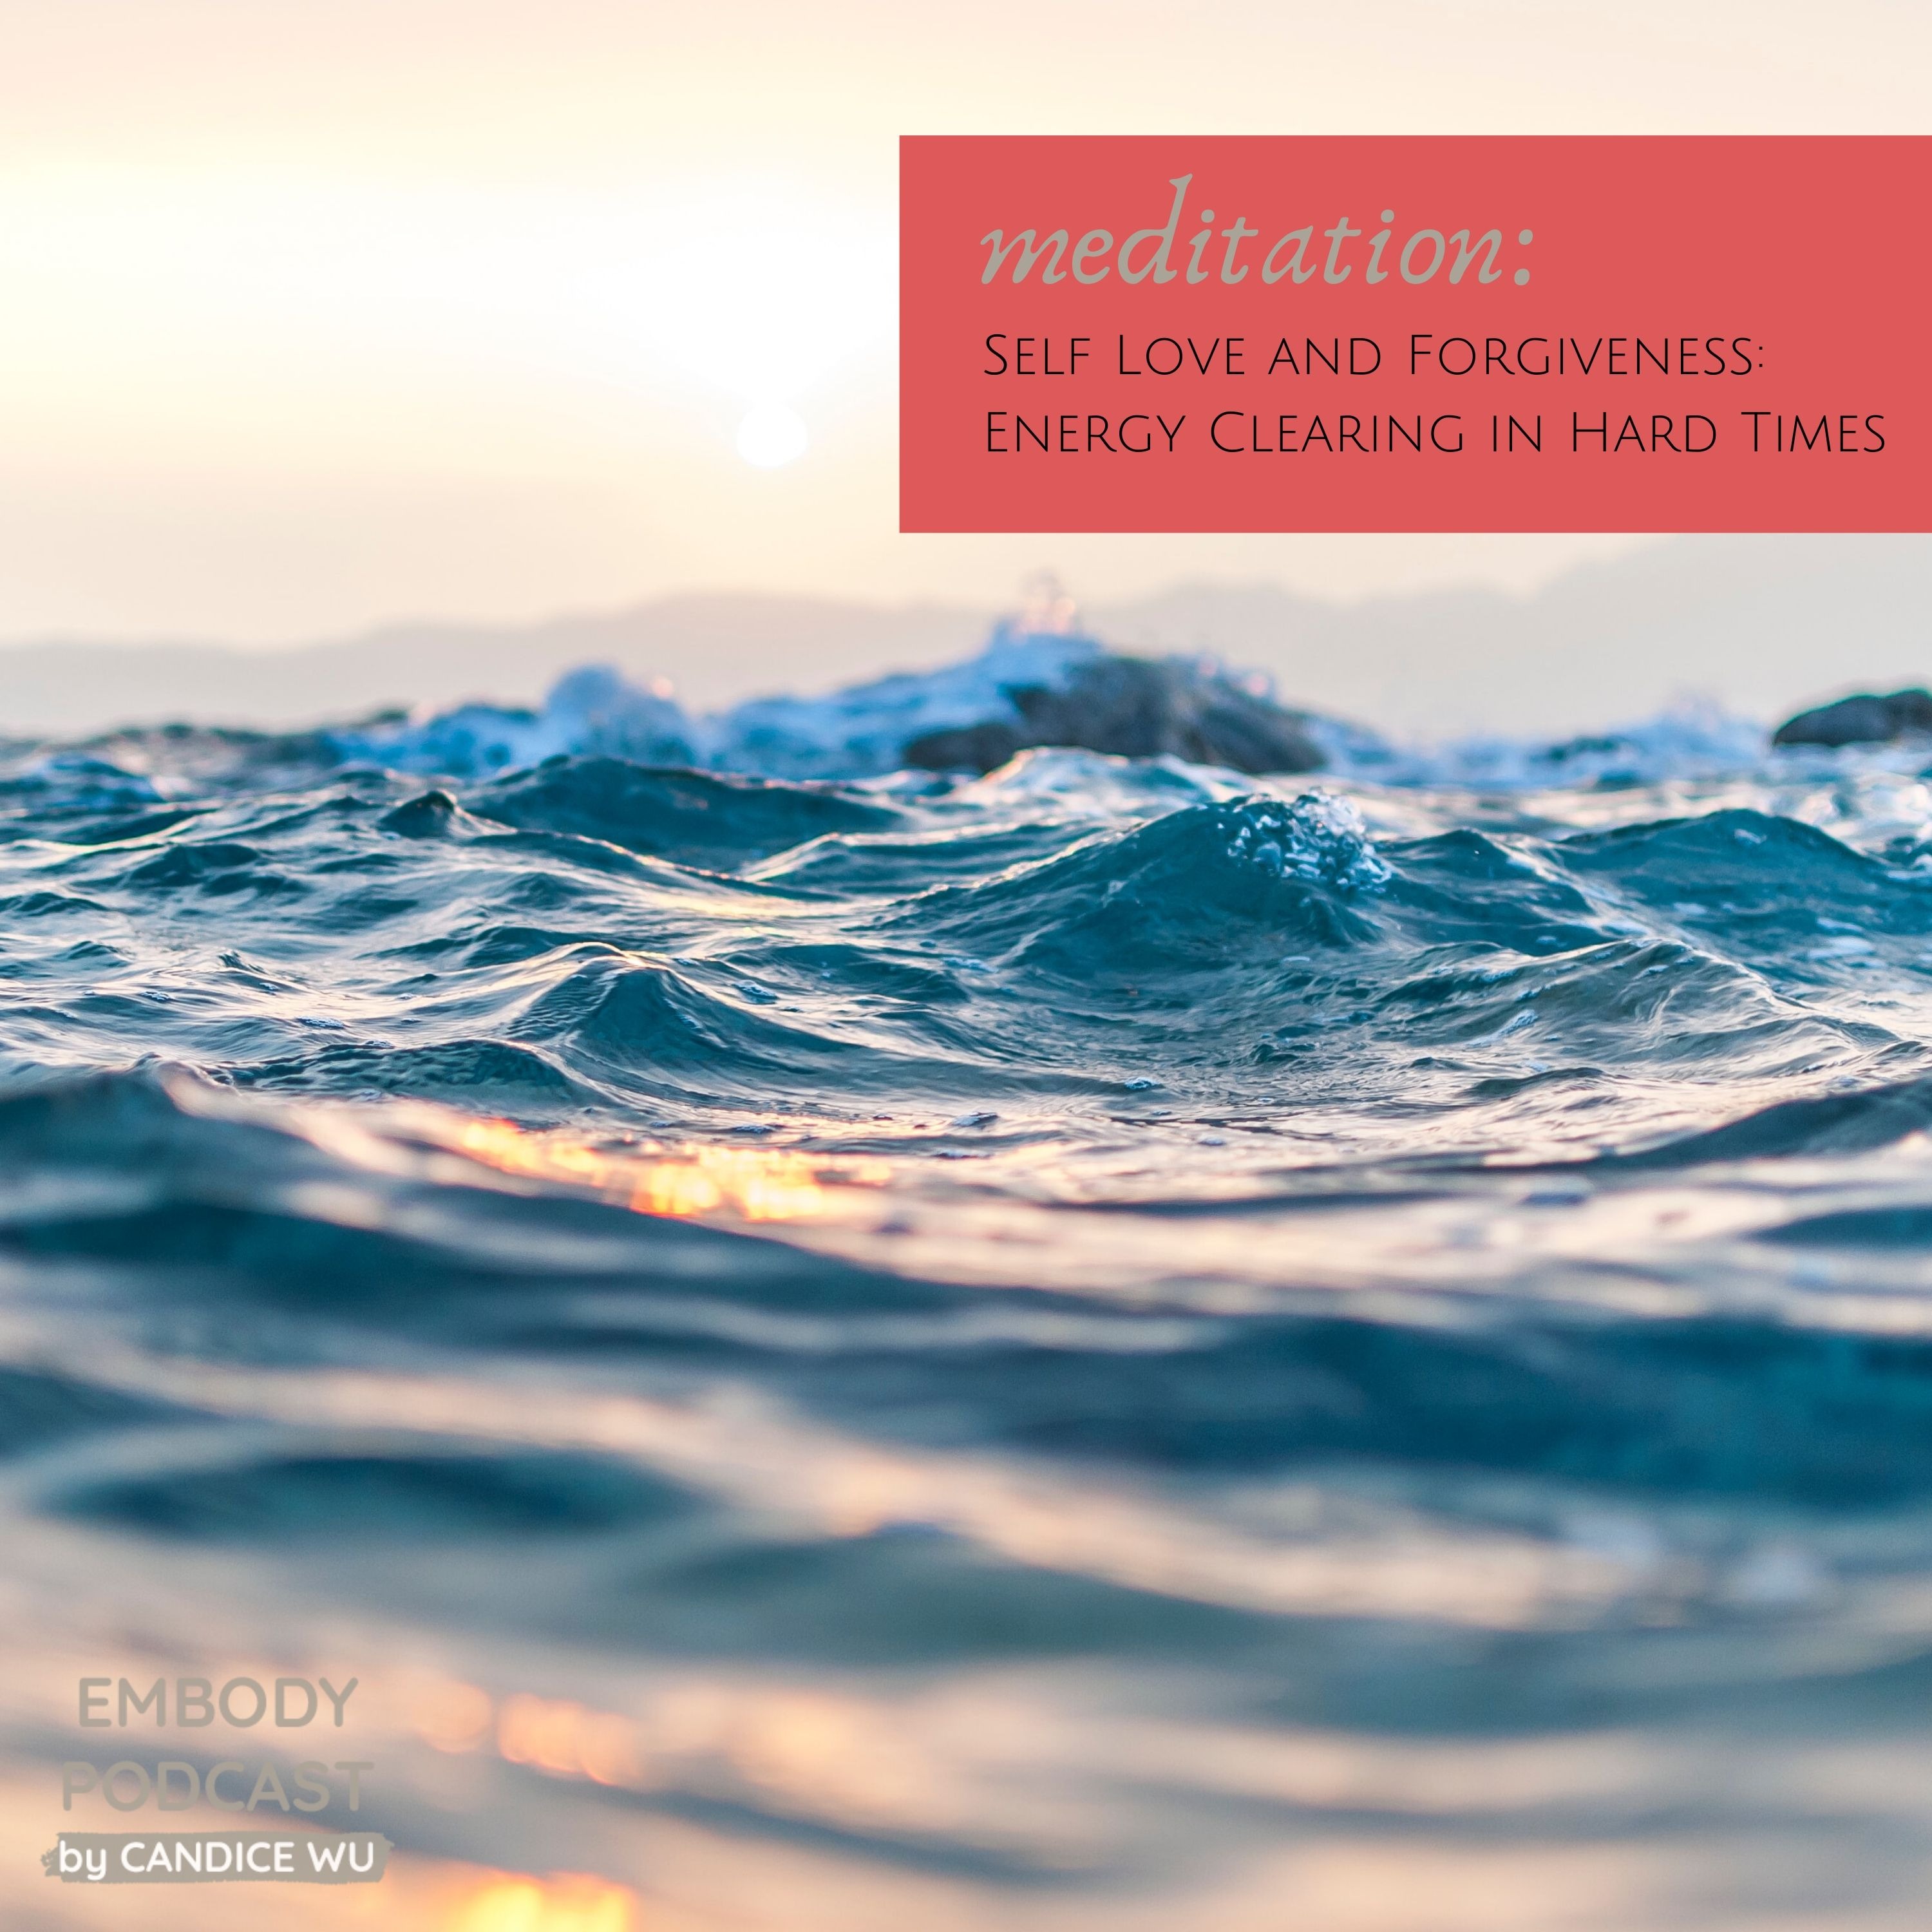 116: Meditation: Self Love and Forgiveness: Energy Clearing in Hard Times